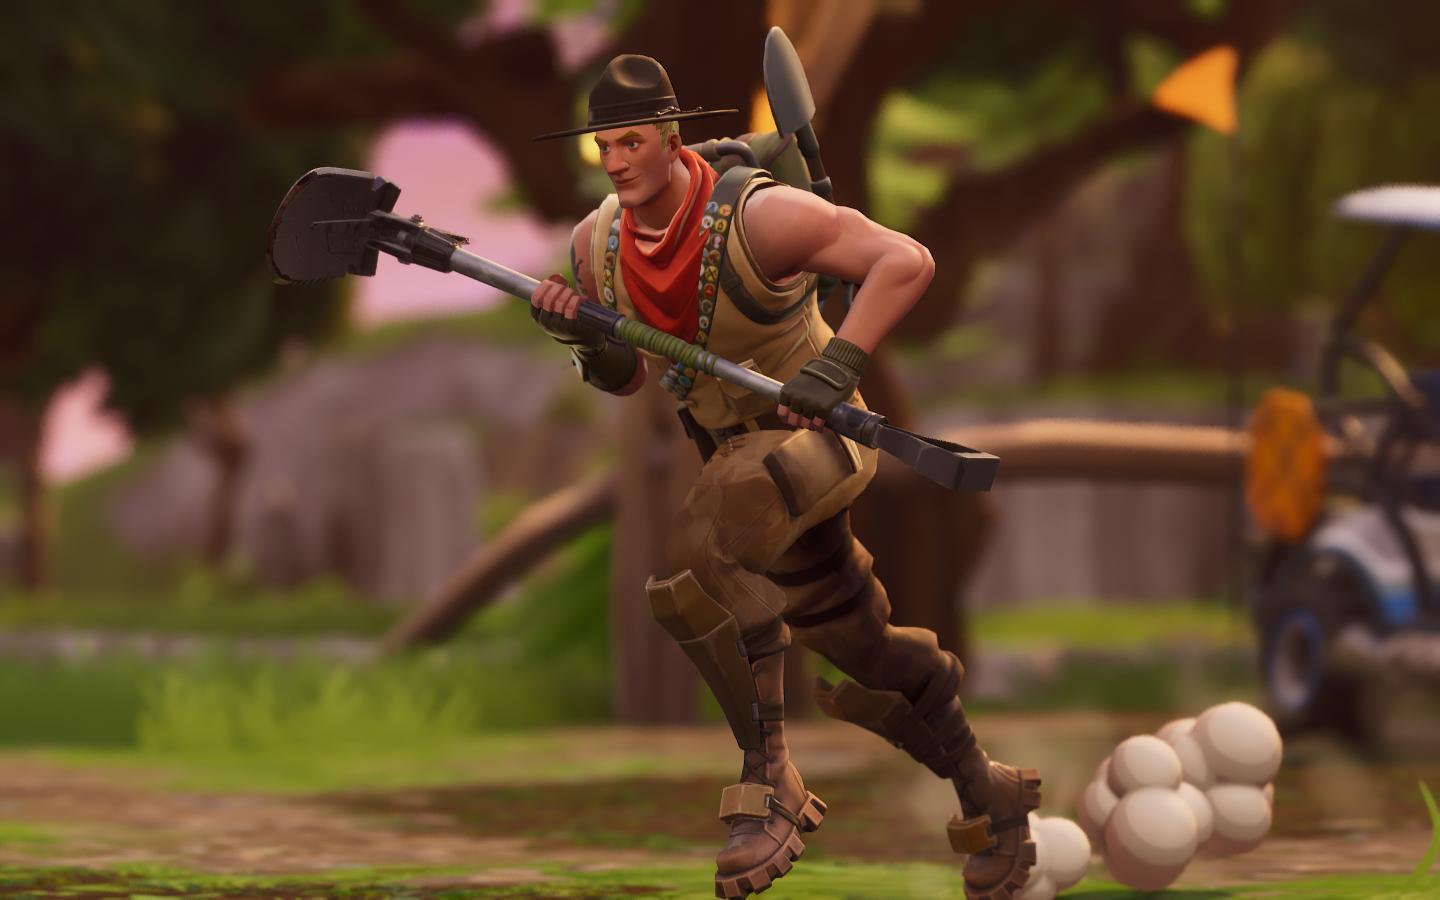 Kind of obvious combo but really digging it Sash Sergeant + Raptor